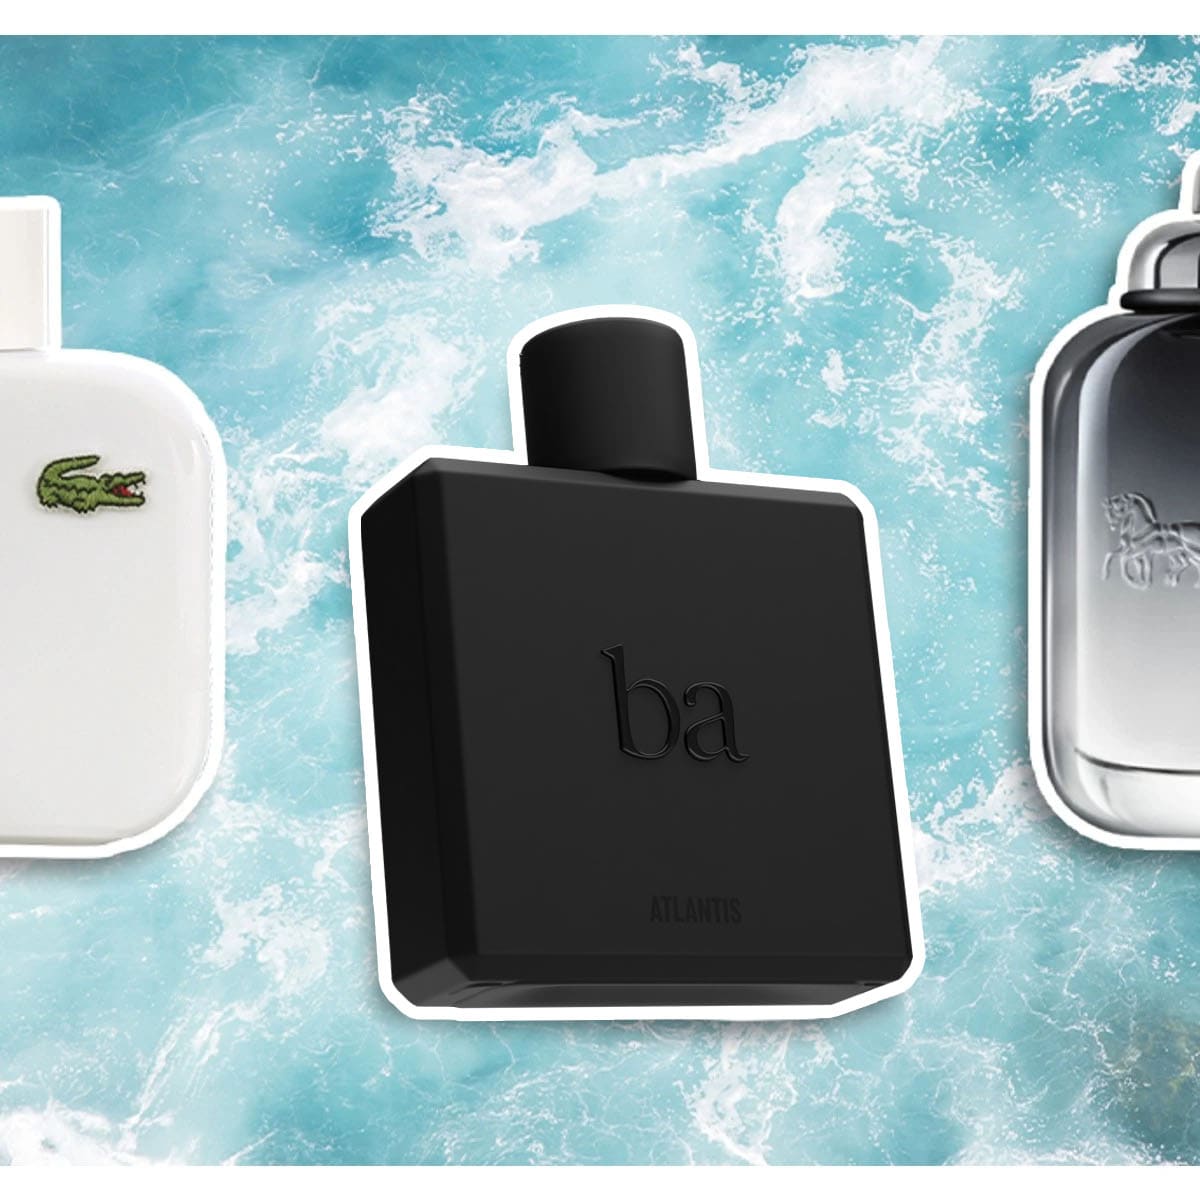 Why Luxury Brands Are Using Scents and Smells to Woo Customers - The Peak  Magazine